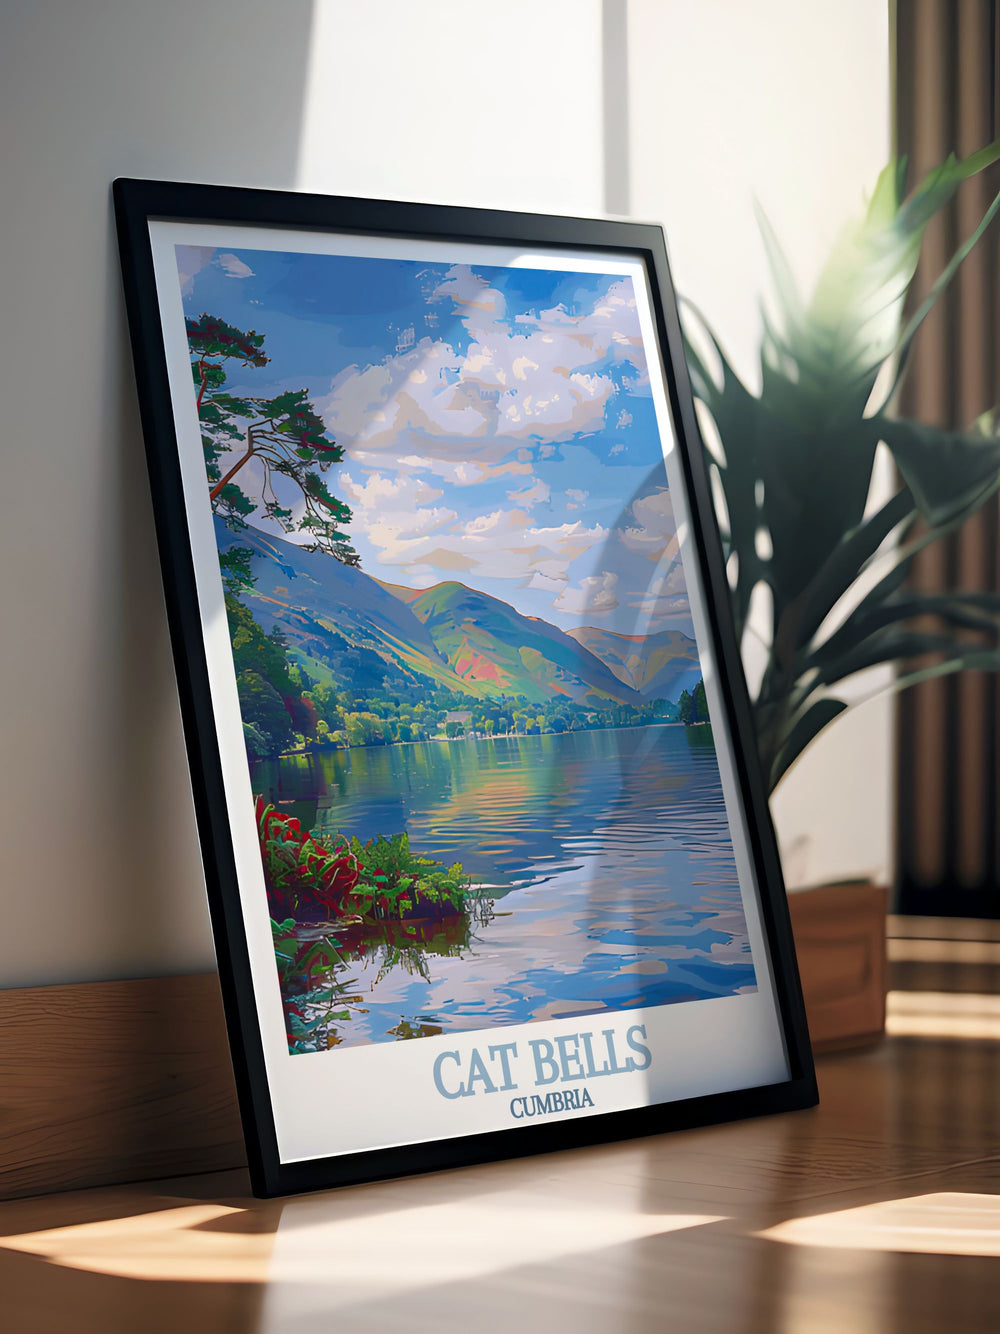 Beautiful Derwentwater prints that bring the picturesque scenery of the Lake District into your home perfect for UK home decor these Cumbria travel prints make an excellent addition to your wall decor and a thoughtful gift for nature lovers.